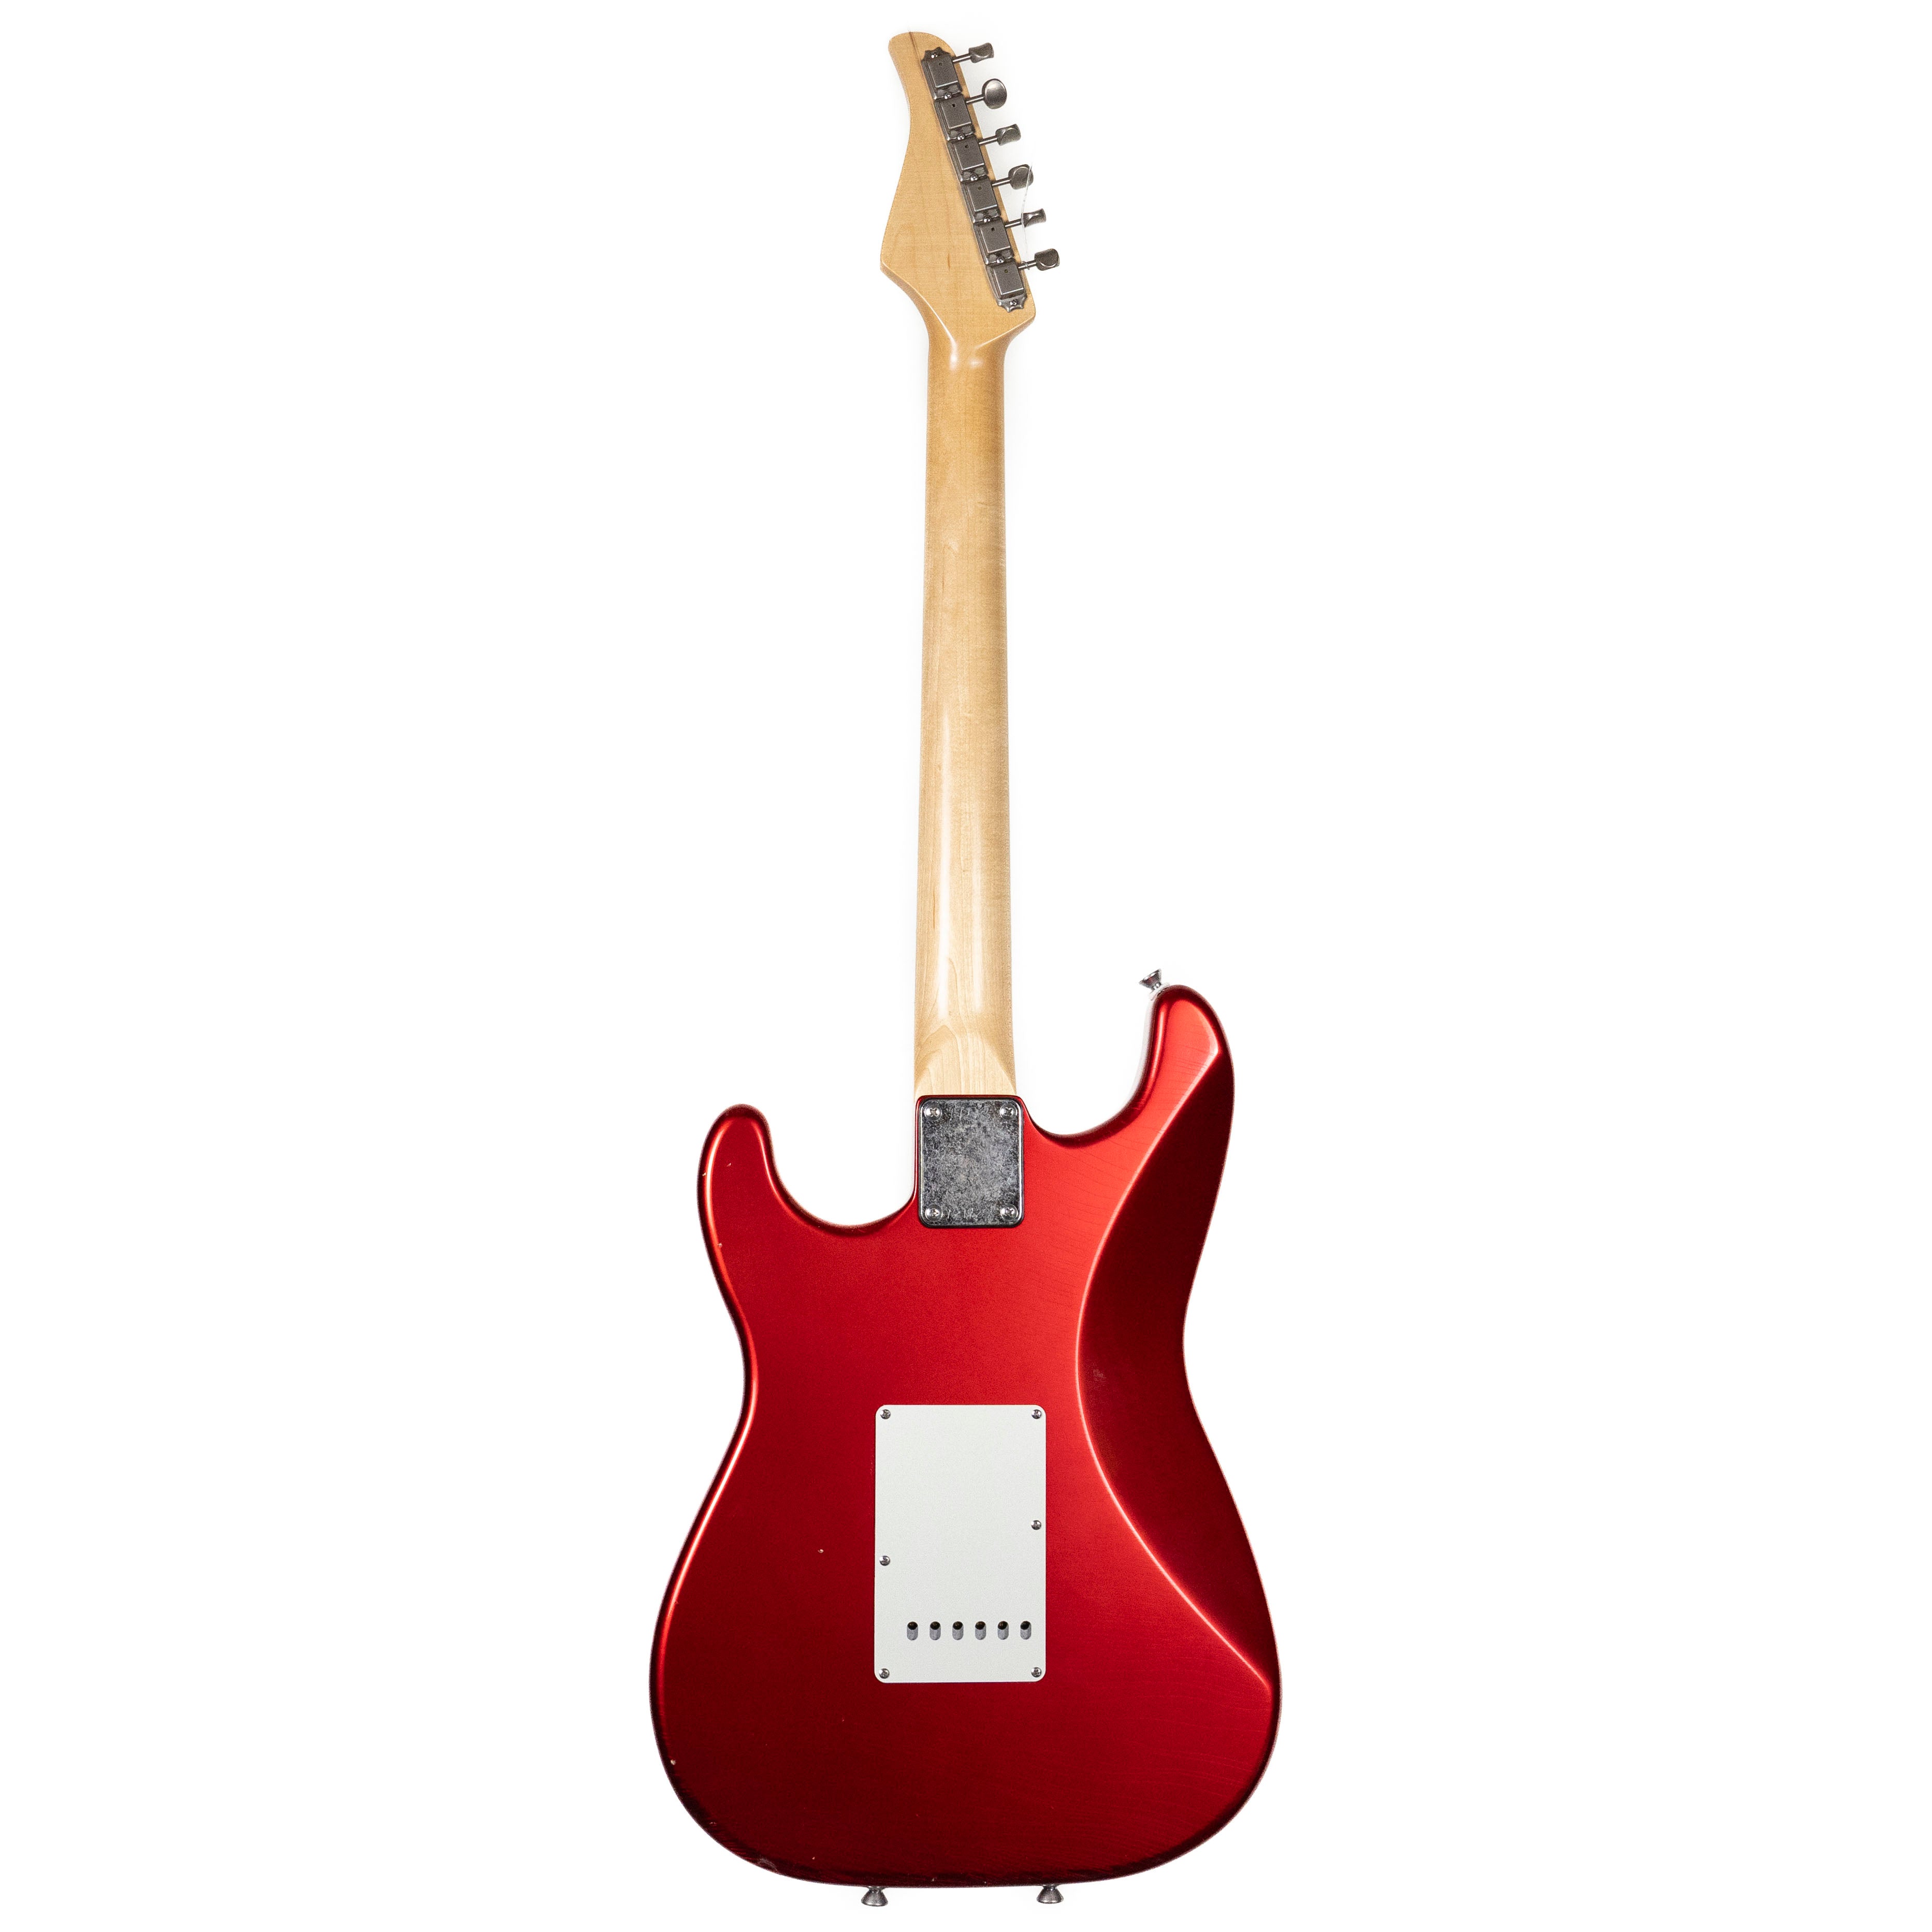 Pensa MK-80 Aged Candy Apple Red